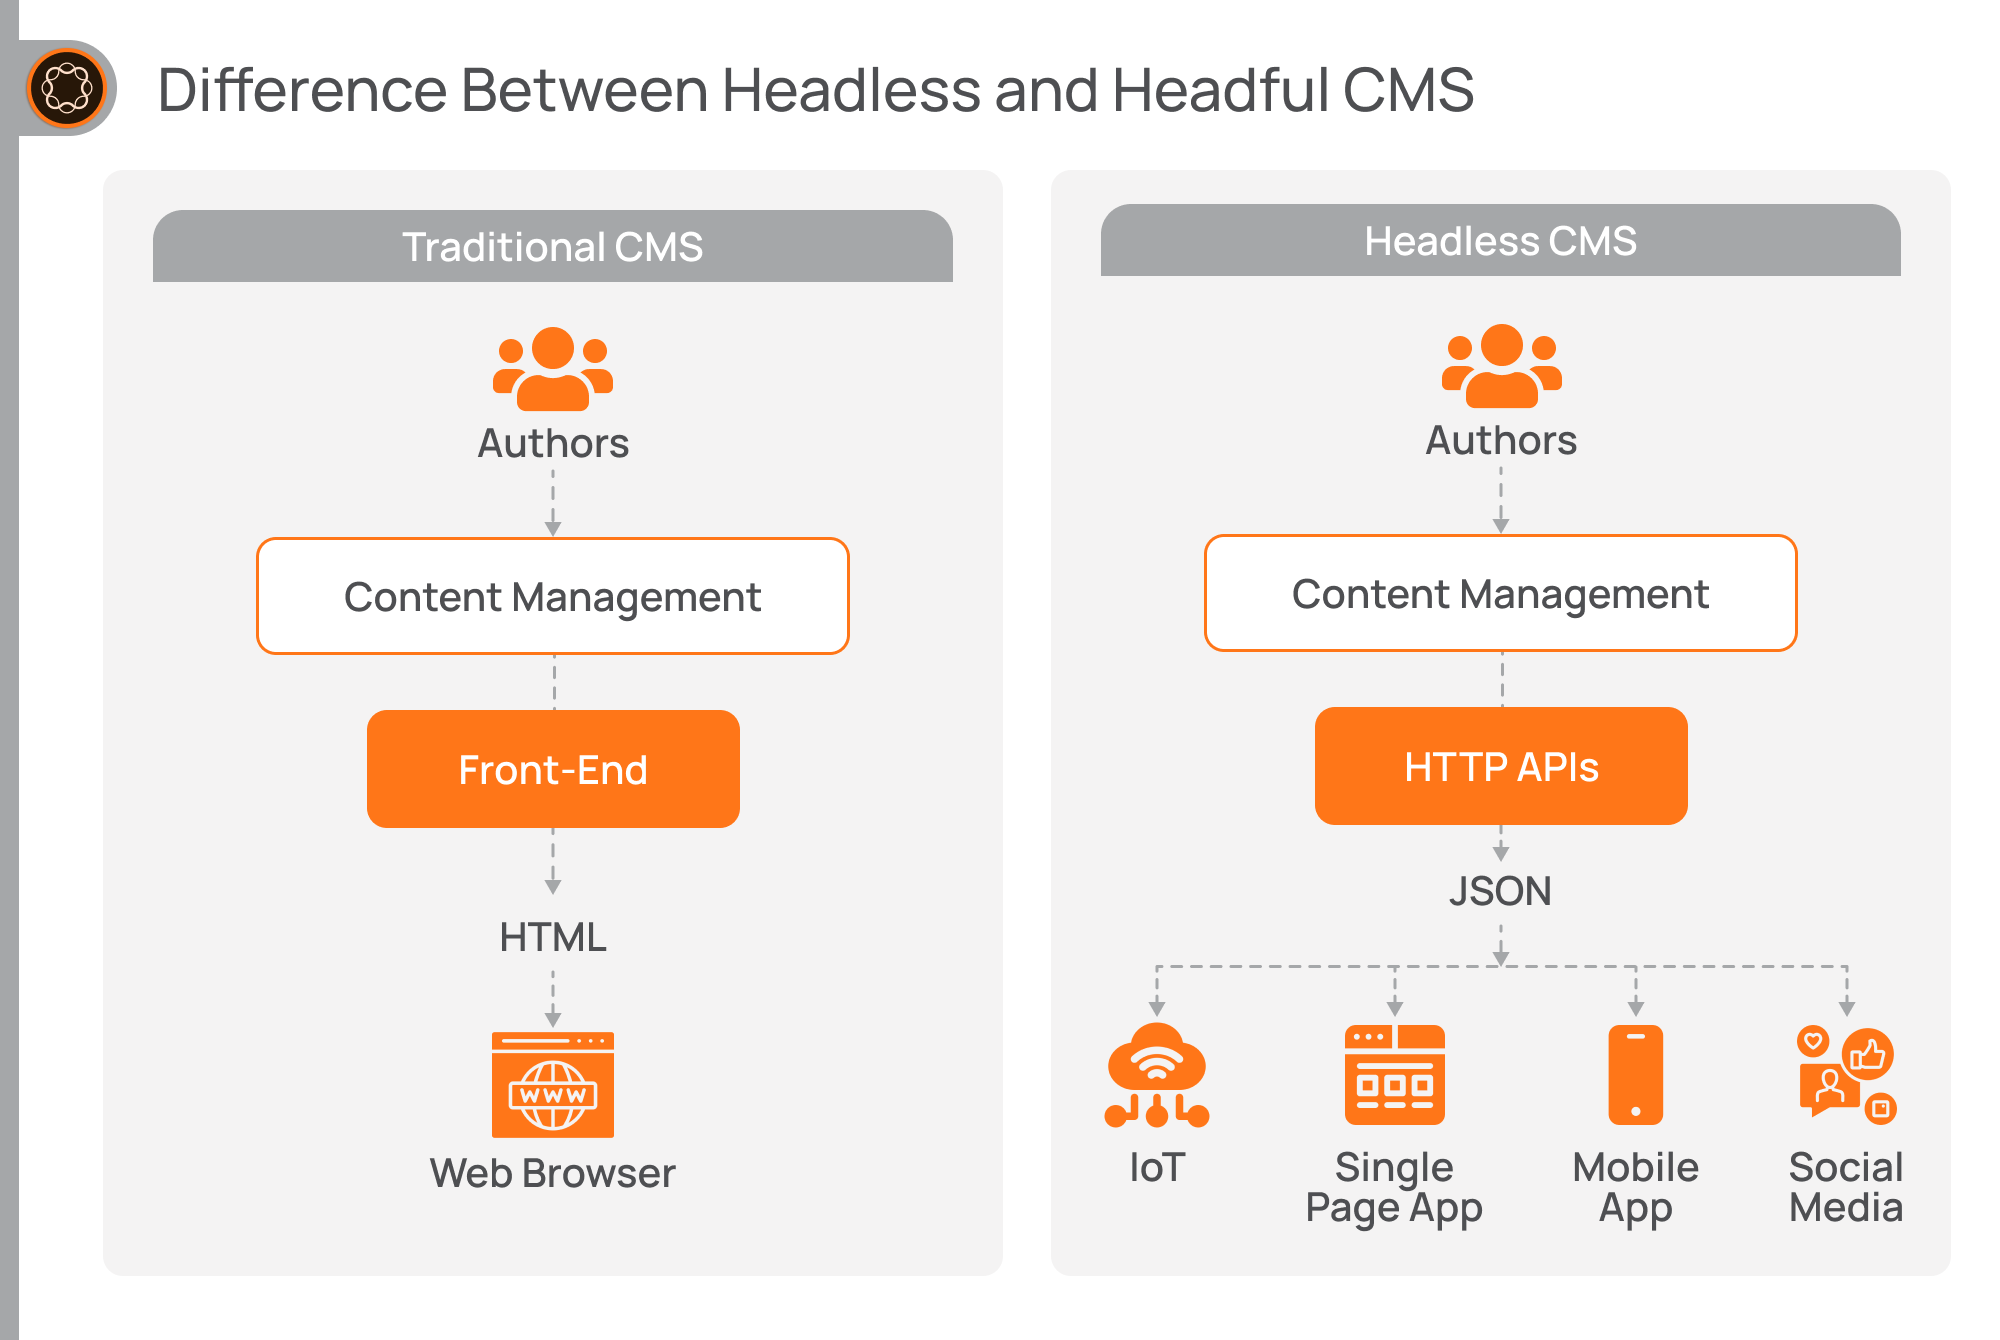 Difference between headless and headful CMS